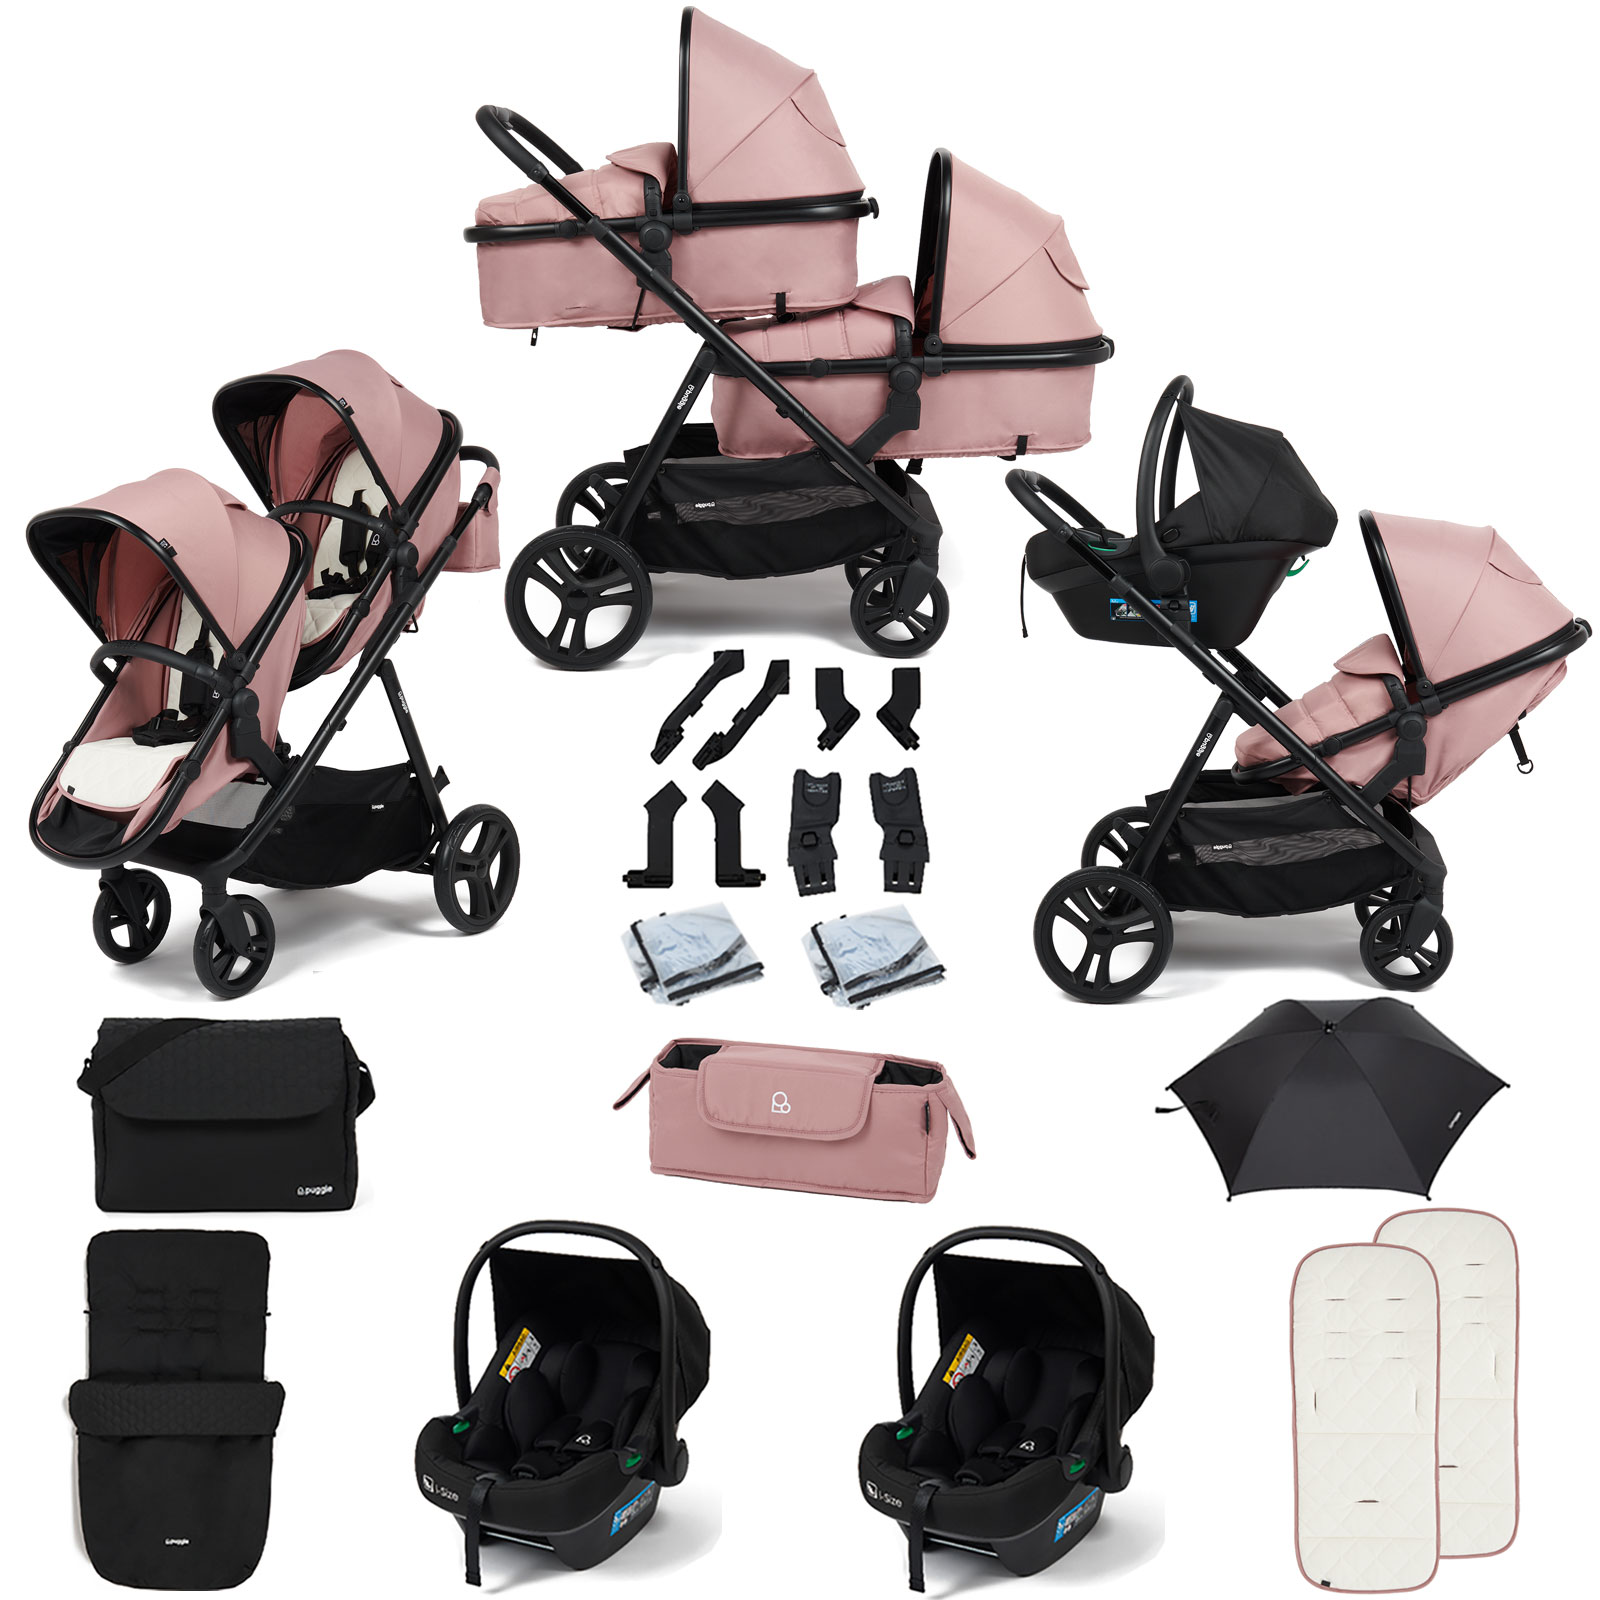 Puggle Memphis 2-in-1 Duo i-Size Double Travel System with 2 i-Size Car Seats, Footmuff, Changing Bag & Parasol - Dusk Pink